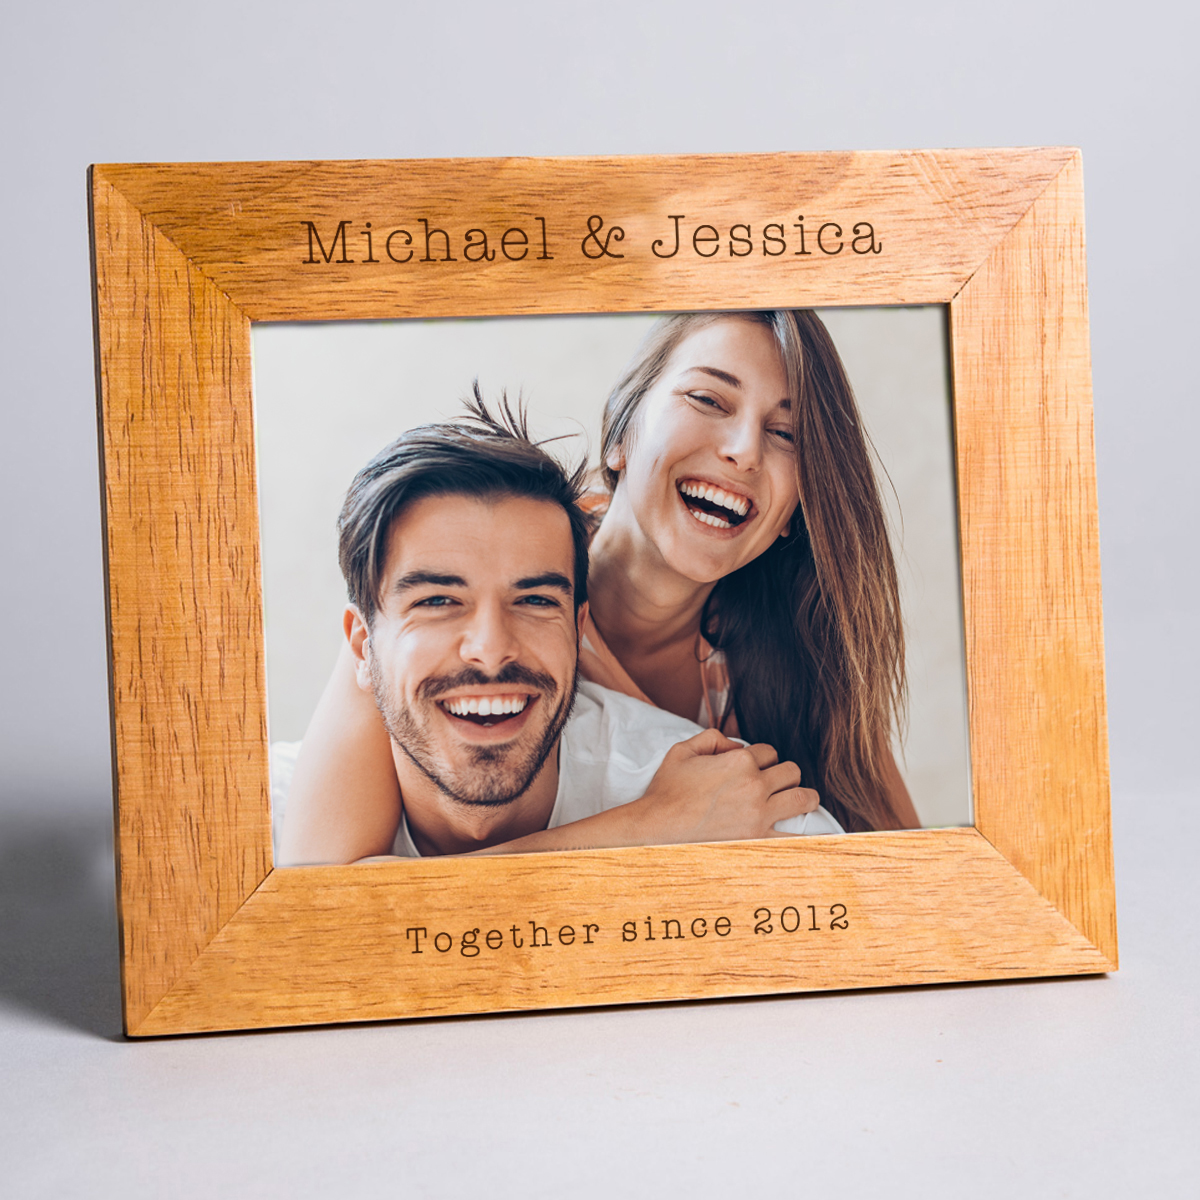 Personalised Engraved Wooden Photo Frame - Together Since...